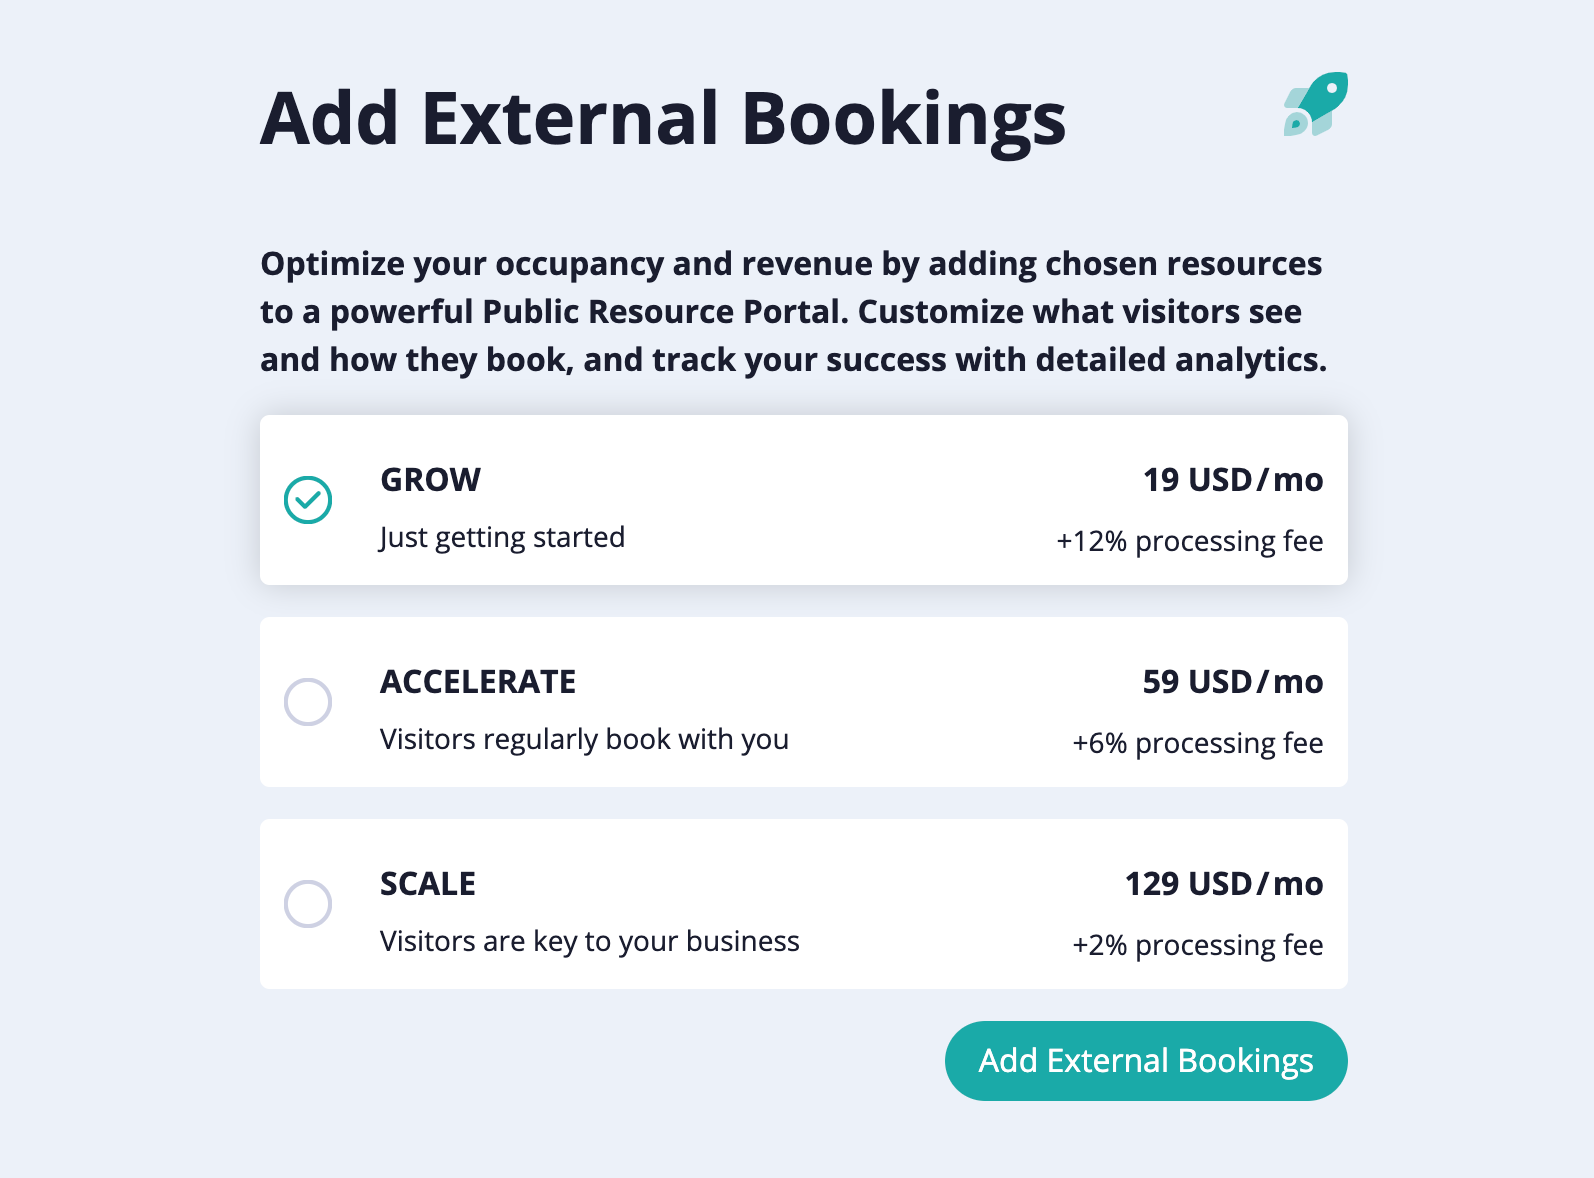 When your subscription is for 15 members pay 19 USD per month for External Bookings; for 40 members pay 39 USD per month; for 85 members pay 69 USD per month, for 180 members pay 129 USD per month.